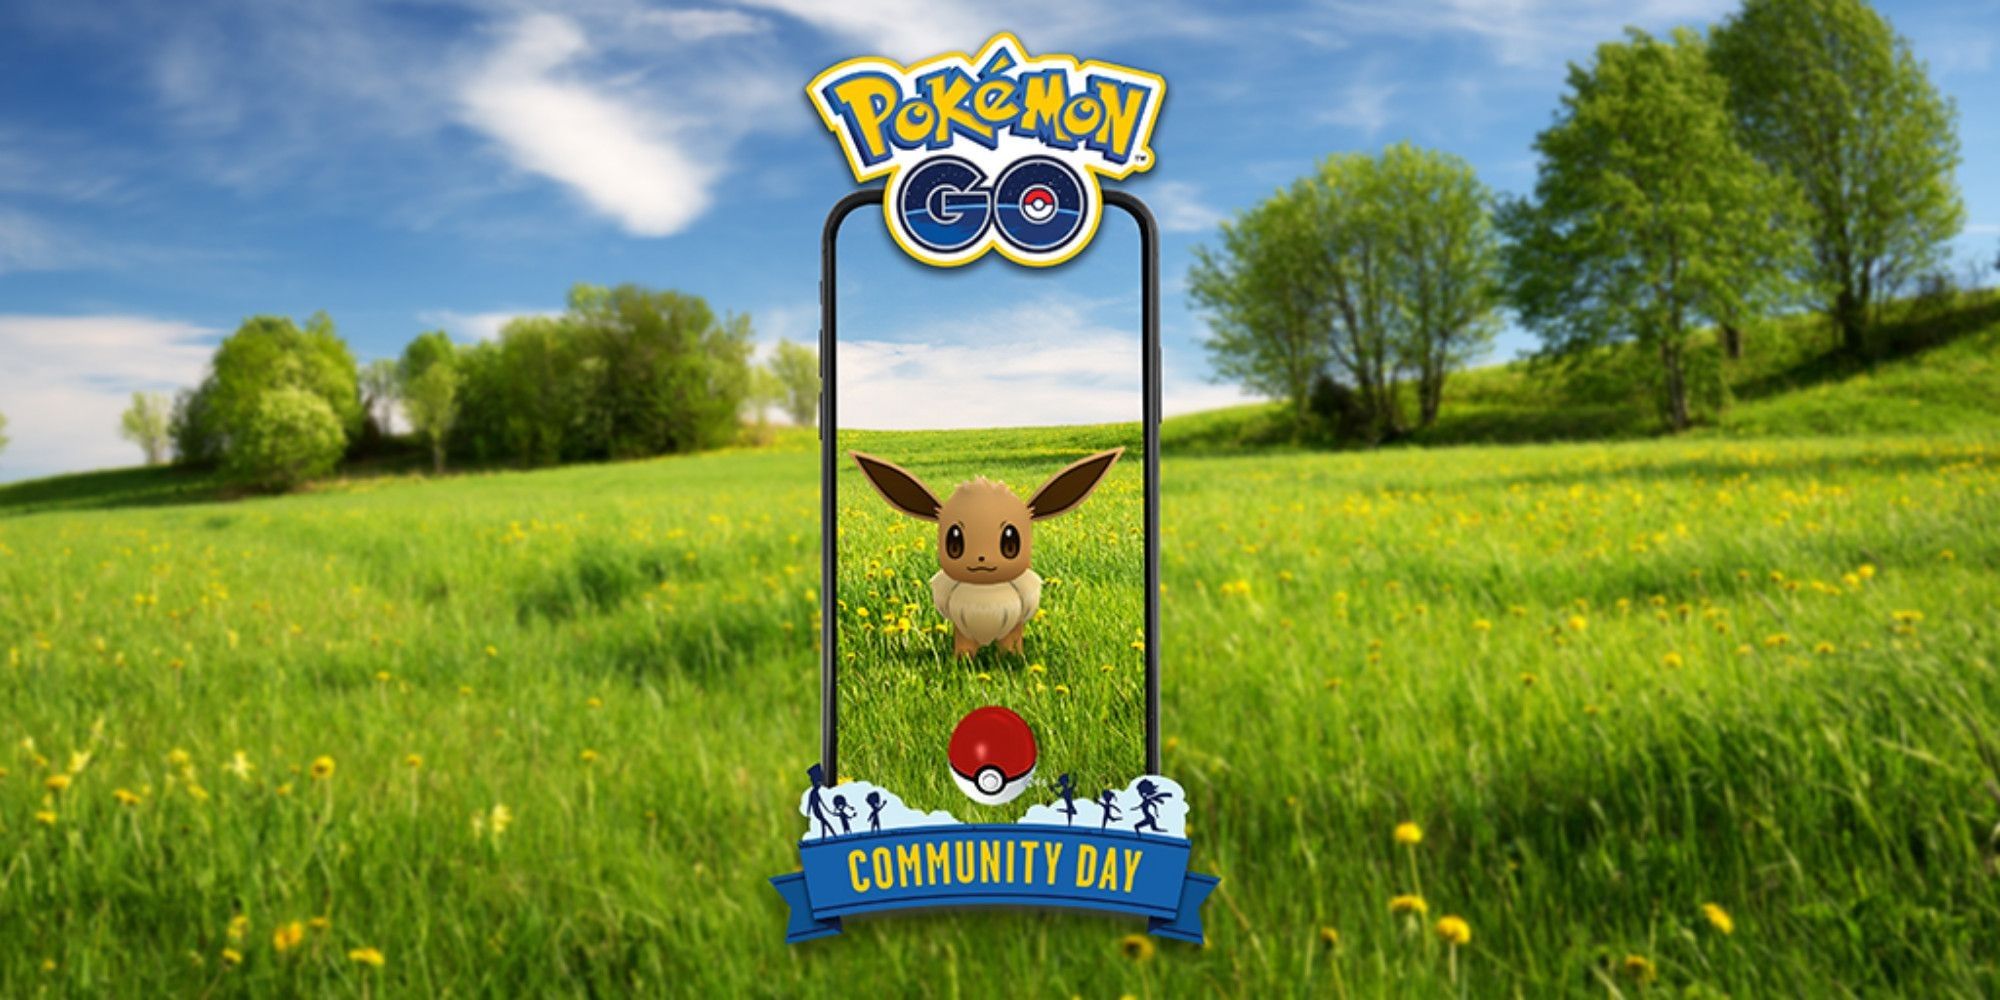 Adorable Eevee To Feature in August Community Day